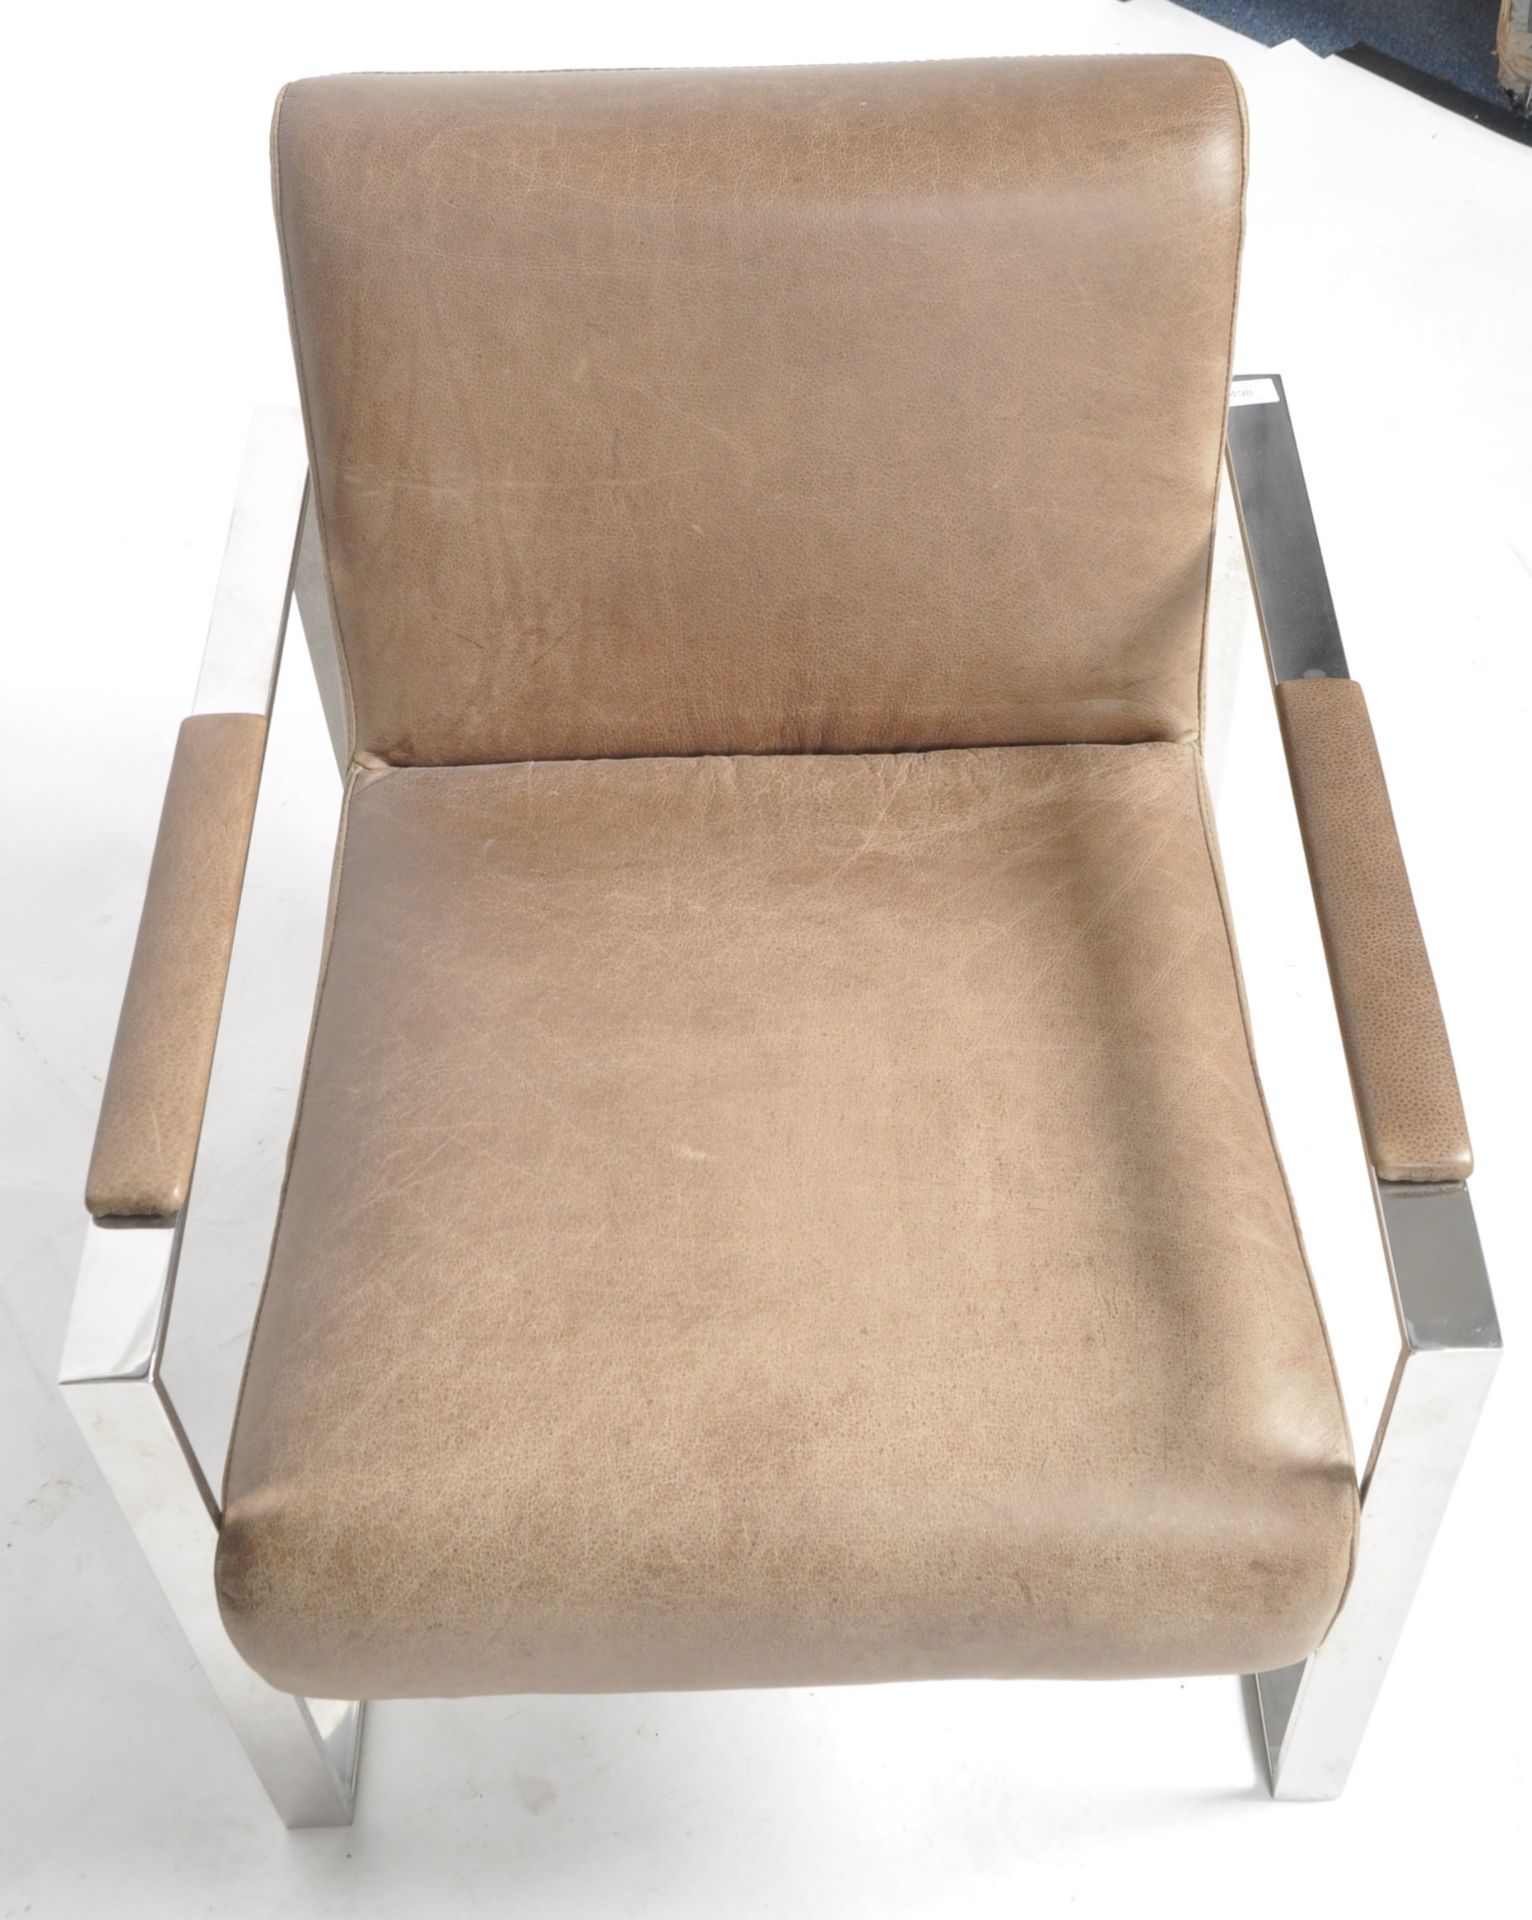 CONTEMPORARY CHROME AND BROWN LEATHER EASY CHAIR - Image 2 of 4